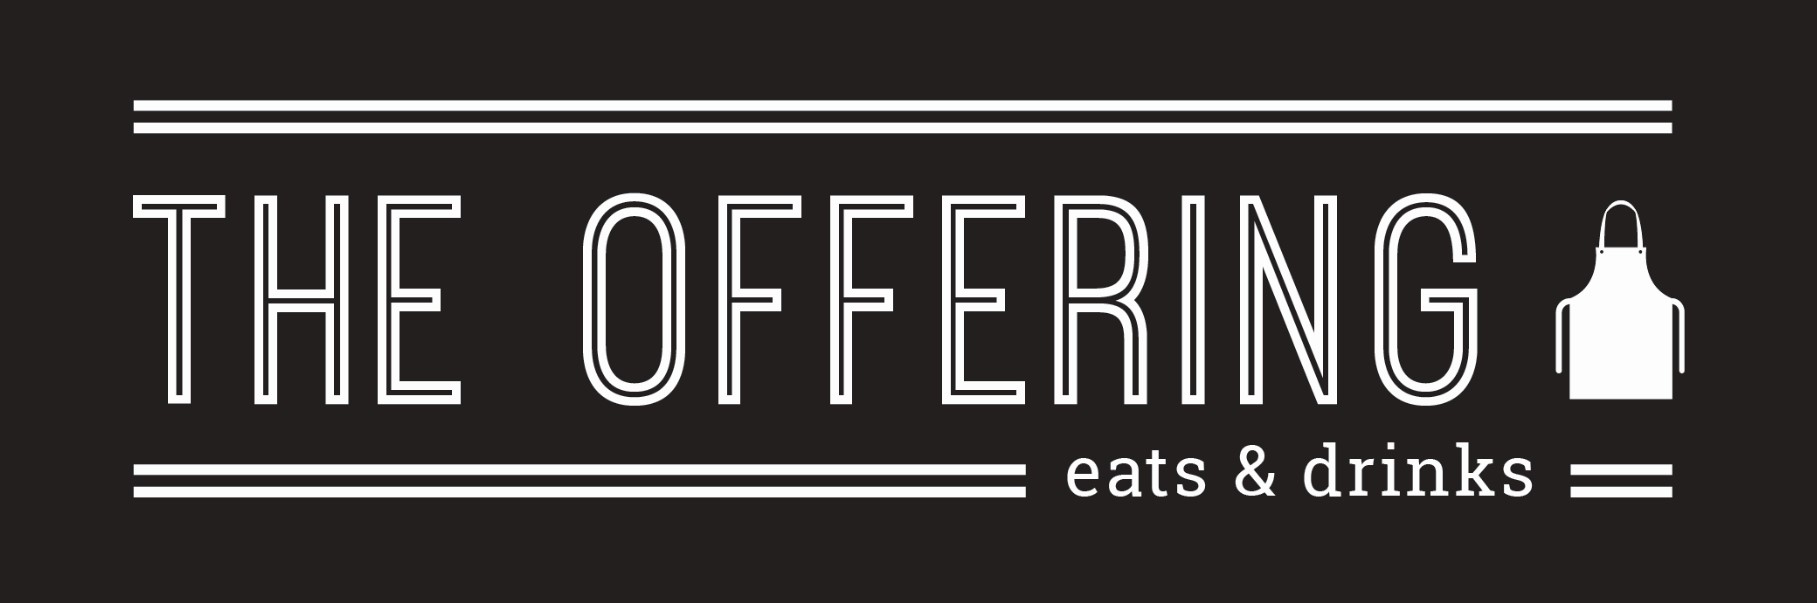 the offering logo